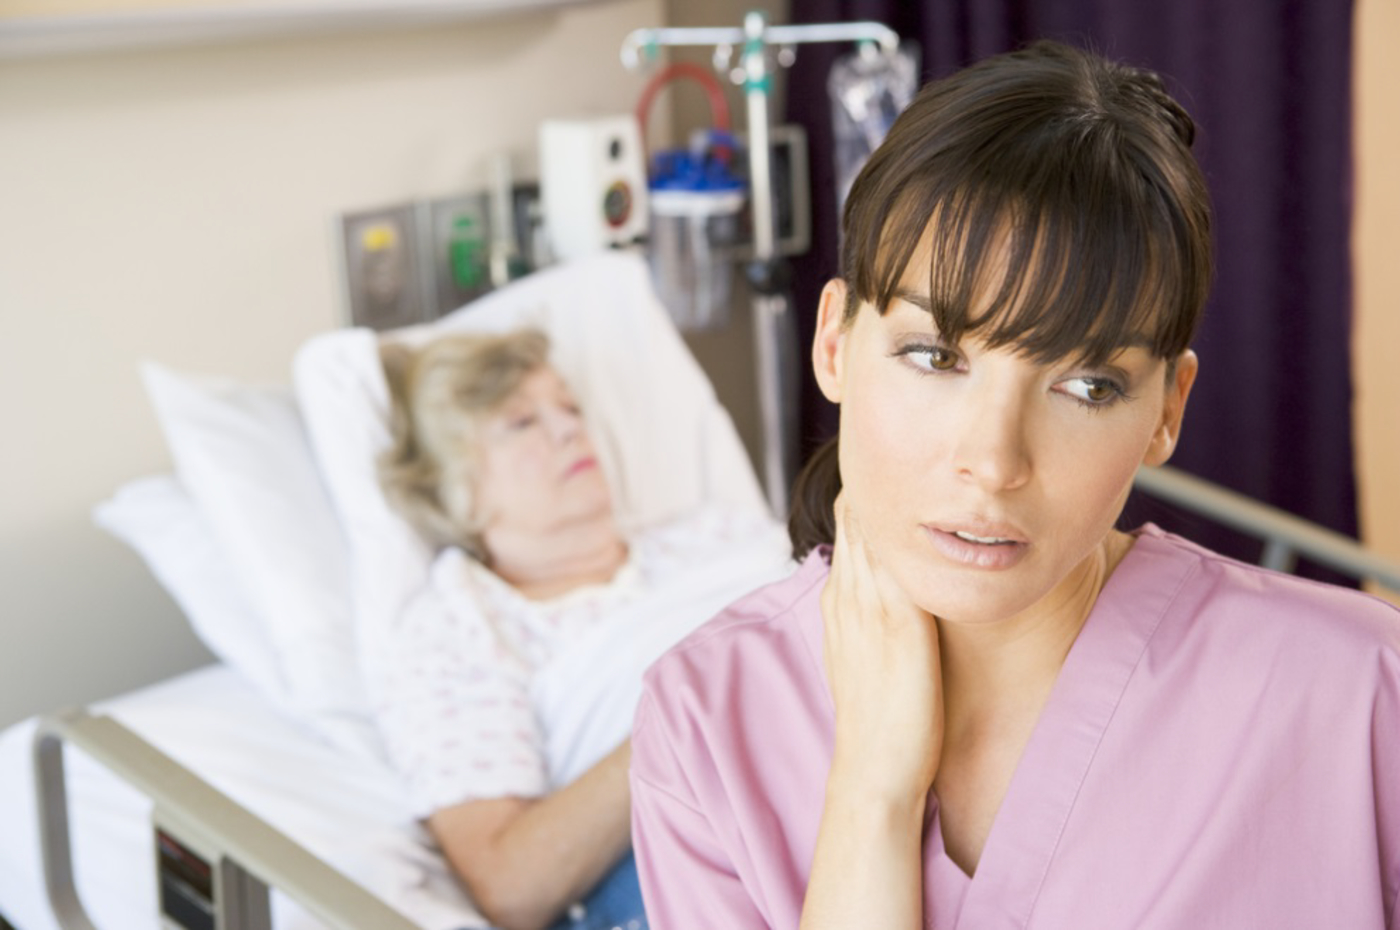 Image of a nurse in foreground looking stressed with an older woman patient lying in a hospital bed behind her. The image depicts the need for the job stress program which would help nurses learn how to minimize stress, which would in turn translate to improved patient care.